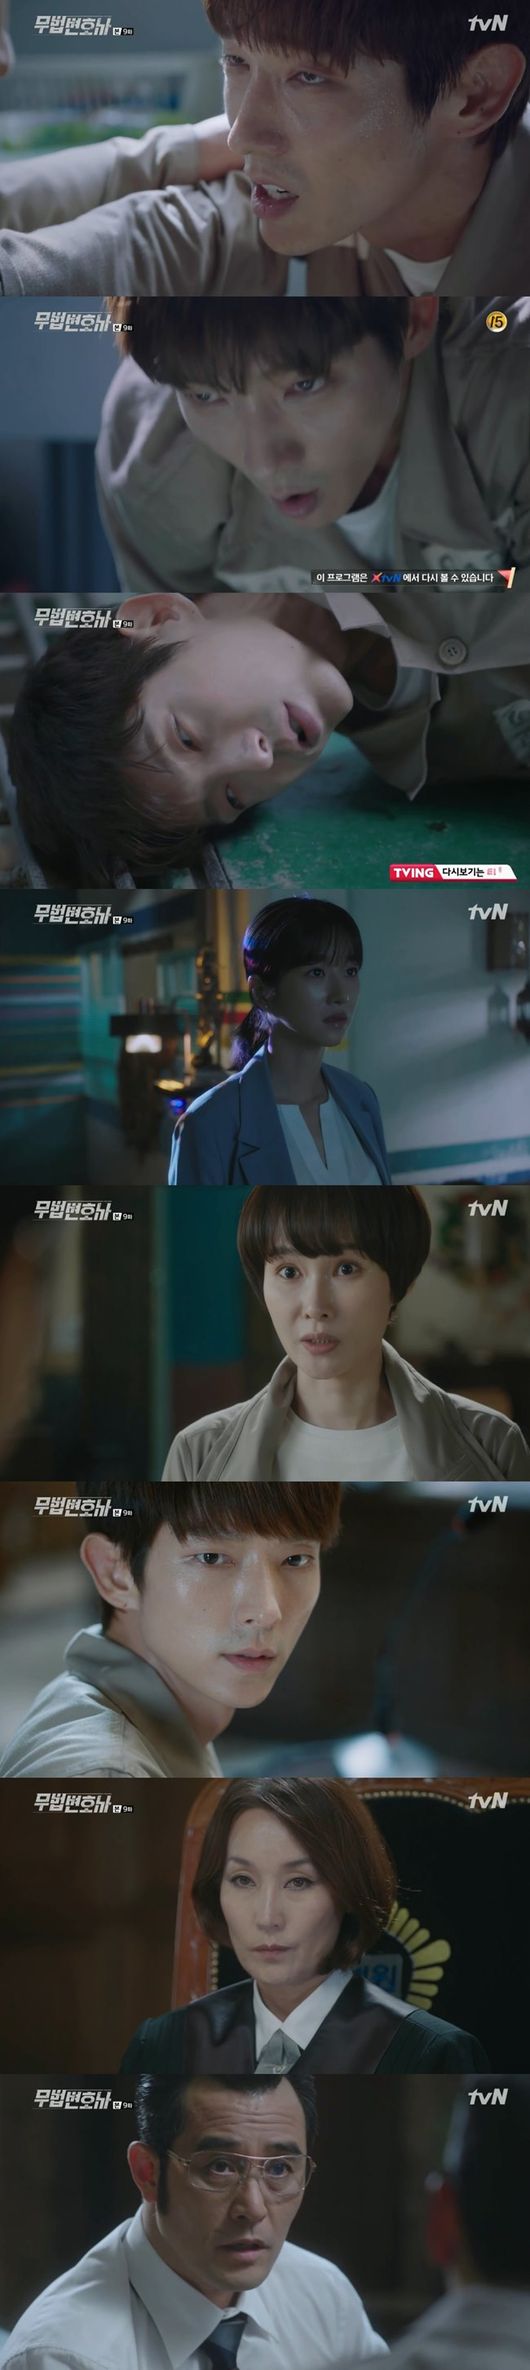 Unlawful lawyer Lee Joon-gi is again in Danger: Can Seo Ye-ji uncover Lee Joon-gis innocence?In the 9th episode of the cable channel tvN Saturday Drama Unlawful Lawyer (played by Yoon Hyun-ho and directed by Kim Jin-min), which was broadcast on the afternoon of the 9th, Ha Jae-yi was shown trying to prove the innocence of Bong Sang-pil (Lee Joon-gi), who wrote Murder An Innocent Man.Bong was arrested after writing An Innocent Man, who killed his uncle, For Heroes (the guide).An Innocent Man was written by his nephew who stabbed his uncle and dropped him from the rooftop. Ahn Oh-ju (Choi Min-soo), who worked, was shameless.Cha Moon-sook (Lee Hye-young), who knew the truth, was uncomfortable to plant.As Bong Sang-pil was hit by Danger, Ha Jae-i was embarrassed: Lawless Lawyer firms were seized and searched; prosecutors found anesthetics in law firm offices, and office staff were surprised.Huh Jae-yi hurried to see Bong Sang-pil, and Bong Sang-pil, who was shocked by the death of Choi For Heroes, was distressed.Ha Jae-yi decided to go to the defense of Bong Sang-pil himself, and he tried to protect Bong Sang-pil, and he was trying to protect the employees who were called to the police station as a reference.Ha Jae-yi visited Judge Cha Moon-sook, who said he would take on the defense of Bong Sang-pil and asked Cha Moon-sook to let him carry out the funeral of Choi For Heroes himself.Cha Moon-sook told Ha Jae-yi to accept Bong Sang-pils innocence on that condition, and Ha Jae-yi, who bowed his head to Cha Moon-sook, allowed Bong Sang-pil to attend the funeral of Choi For Heroes.Bong was in pain, more fond of him because he was the only family he had ever lived in, and he was sorry for driving him to death.Ha Jae-yi, who saw such a Bong Sang-pil, was also hard.An Oju went to Bong Sang-pil, who was angry when he asked why he killed Choi Heroes and put An Innocent Man on him.An Oju told an angry Bong Sang-pil, You are a highlight; if you want to save your people, dont breathe in it, Blackmail – Cinémix Par Chloé.Bong Sang-pil stimulated him by telling An-oh that Cha Moon-sook told Ha Jae-yi that he had tried Yi Gi.Ha Jae-yi went under investigation to exonerate Bong Sang-pil, but it was not as easy as the planned An Innocent Man.Cha Moon-sook provoked the river Michelle Chen (Cha Jung-won) by saying, Can you beat Ha Jae-yi?Anoju was also troubled by the fact that Cha Moon-sook told Bong Sang-pils lawyer that he was Yi Gi.Ha Ji-ho (Lee Han-wi), Ha Jae-yis father, visited his daughter and tried to go home together.Ha Jae-yi was embarrassed by the story that he was in charge of Bong Sang-pils defense, and Ha Jae-yi told his father that he loved Bong Sang-pil.Ha Jae-yis mother, Noh Hyun-joo (Baek Joo-hee), heard about the incident and added interest by recalling her meeting with For Heroes.Ha Jae-i stood at Bong Sang-pils trial.Prosecutor Michelle Chen claimed that Bong sang for For Heroes, blackmail – Cinémix Par Chloé, fatally wounded with a knife, and eventually dropped it off the roof to kill him.He also explained that Bong Sang-pil made it impossible to resist by administering procaine to Choi For Heroes and found the drug in Bong Sang-pils office.An eyewitness, who was pre-conducted by An O-ju, also appeared at the trial, claiming that Bong had dropped the dead man from the roof.Ha Jae-yi questioned how he could be sure that the distance between the scene of the incident and the Innocent Witness was quite far away.Then he used the billboard photos on the scene to question again whether he was sure that Innocent Witness was accurate, and Innocent Witness was embarrassed.Chun Seung-beom (Park Ho-san) claimed that Bong Sang-pil killed Choi For Heroes and tried to receive death insurance.Choi For Heroes opposed Bong Sang-pil to settle in the city, and the relationship between the two was broken.In the end, Bong Sang-pil claimed to be an anti-human Murder criminal who betrayed Choi For Heroes, killed him and tried to get death insurance.Noh went to the photo studio of Ha Jae-yis father, and caught Ha Jae-yi because he needed a photo of the proof, and Ha Jae-yi recalled his mother by taking a picture of Roh Hyun-joo.However, with the appearance of Ha Gi-ho, Noh Hyun-joo left his seat in a hurry.Noh Hyun-joo went back to Ha Jae-yi and handed her a picture of Choi For Heroes before she died, working as a chiropractor for Judge Cha Moon-sook.Noh Hyun-joo added to Ha Jae-yi, I am also fighting Cha Moon-sook.Bong was again in Danger: meeting a colleague in the prison with the organization of For Heroes.And he attacked Bong Sang-pil, not believing that Bong Sang-pil did not kill Choi For Heroes.But Bong Sang-pil tried to protect him and was hit by the Danger of Death.TVN broadcast screen capture